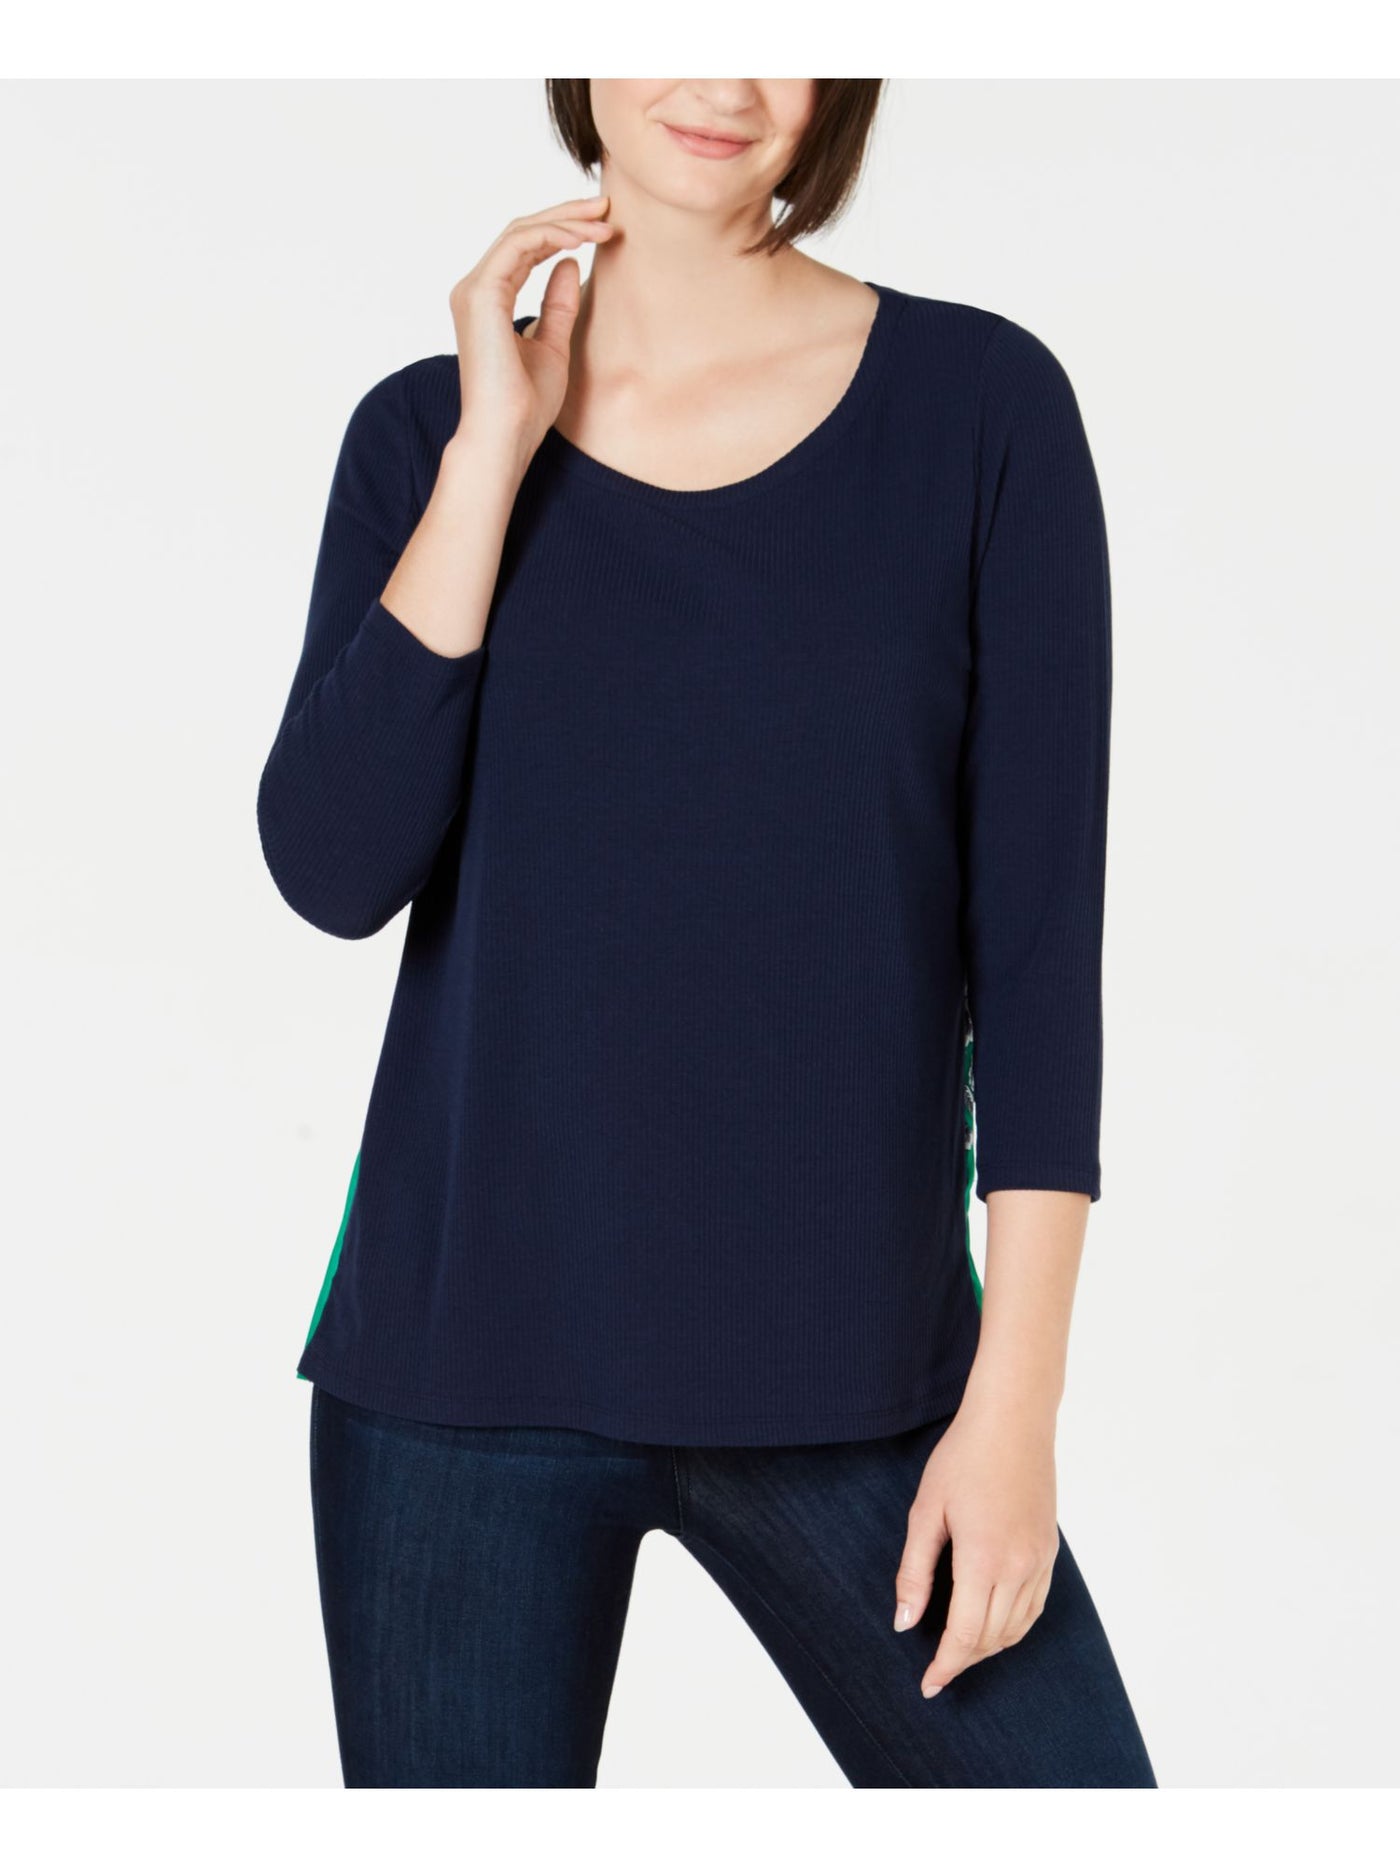 CHARTER CLUB Womens Blue Ribbed 3/4 Sleeve Scoop Neck Top PP